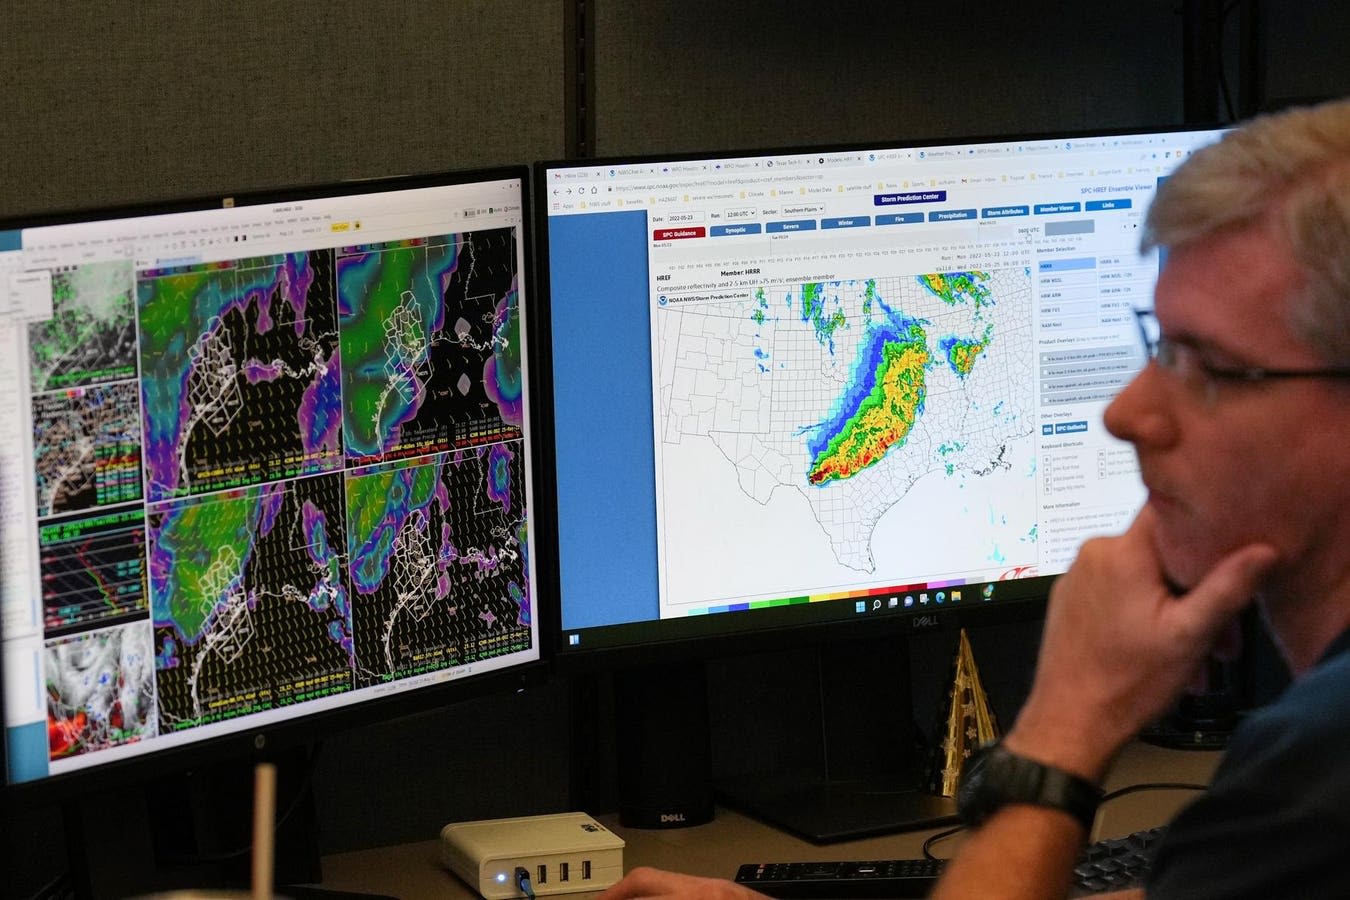 Meteorologists Know How To Detect Tornadoes So Let Them Do Their Job